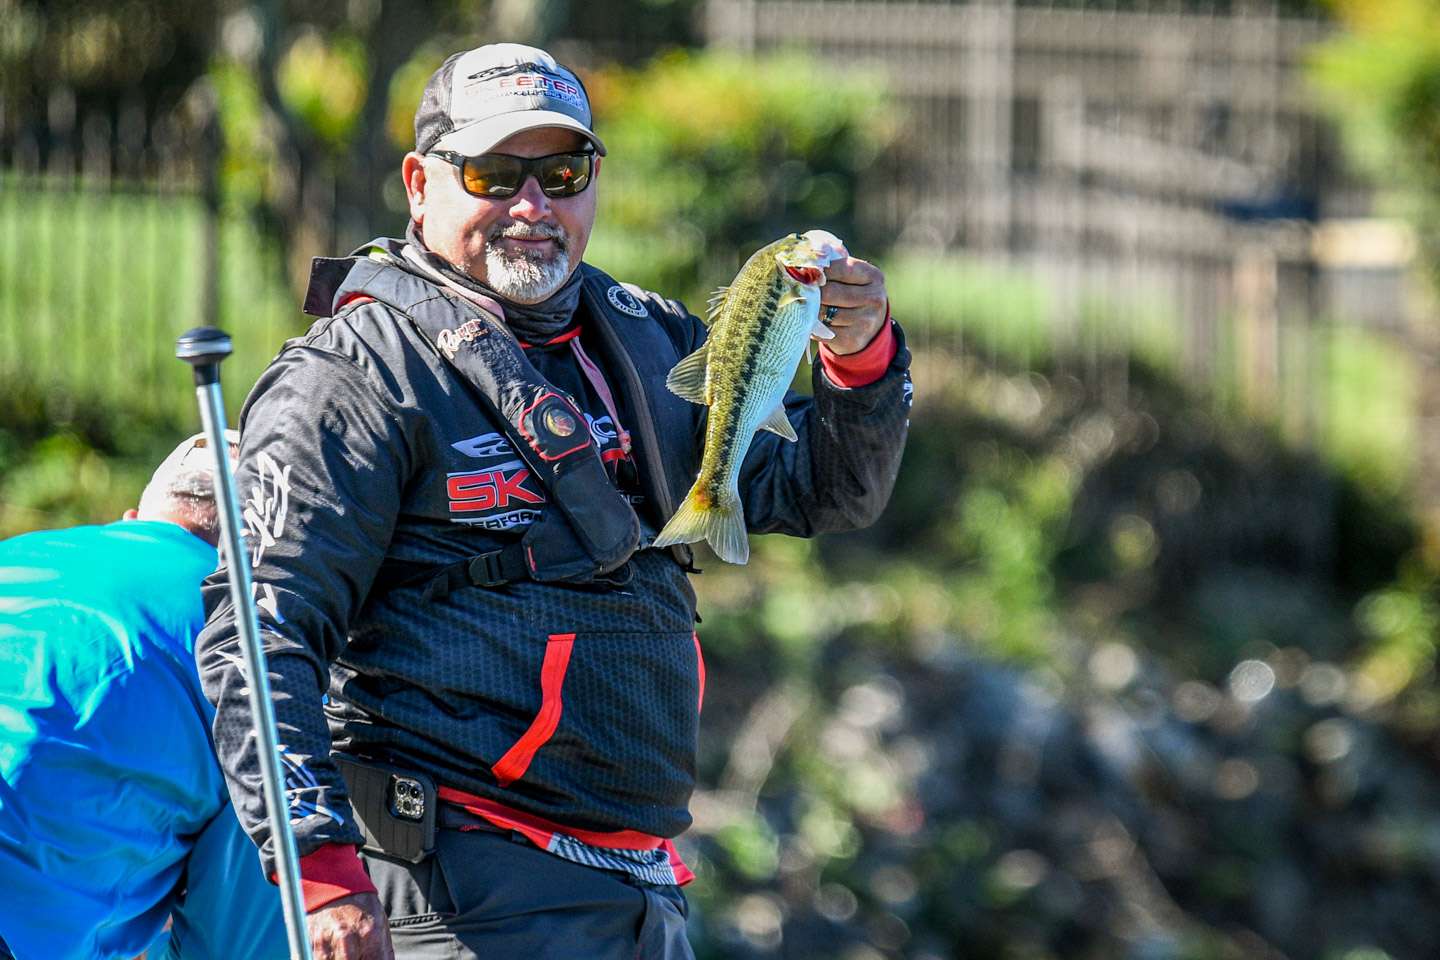 Take a look as the afternoon action is heating up on Day 1 of the Basspro.com Bassmaster Open at Lake Norman. 